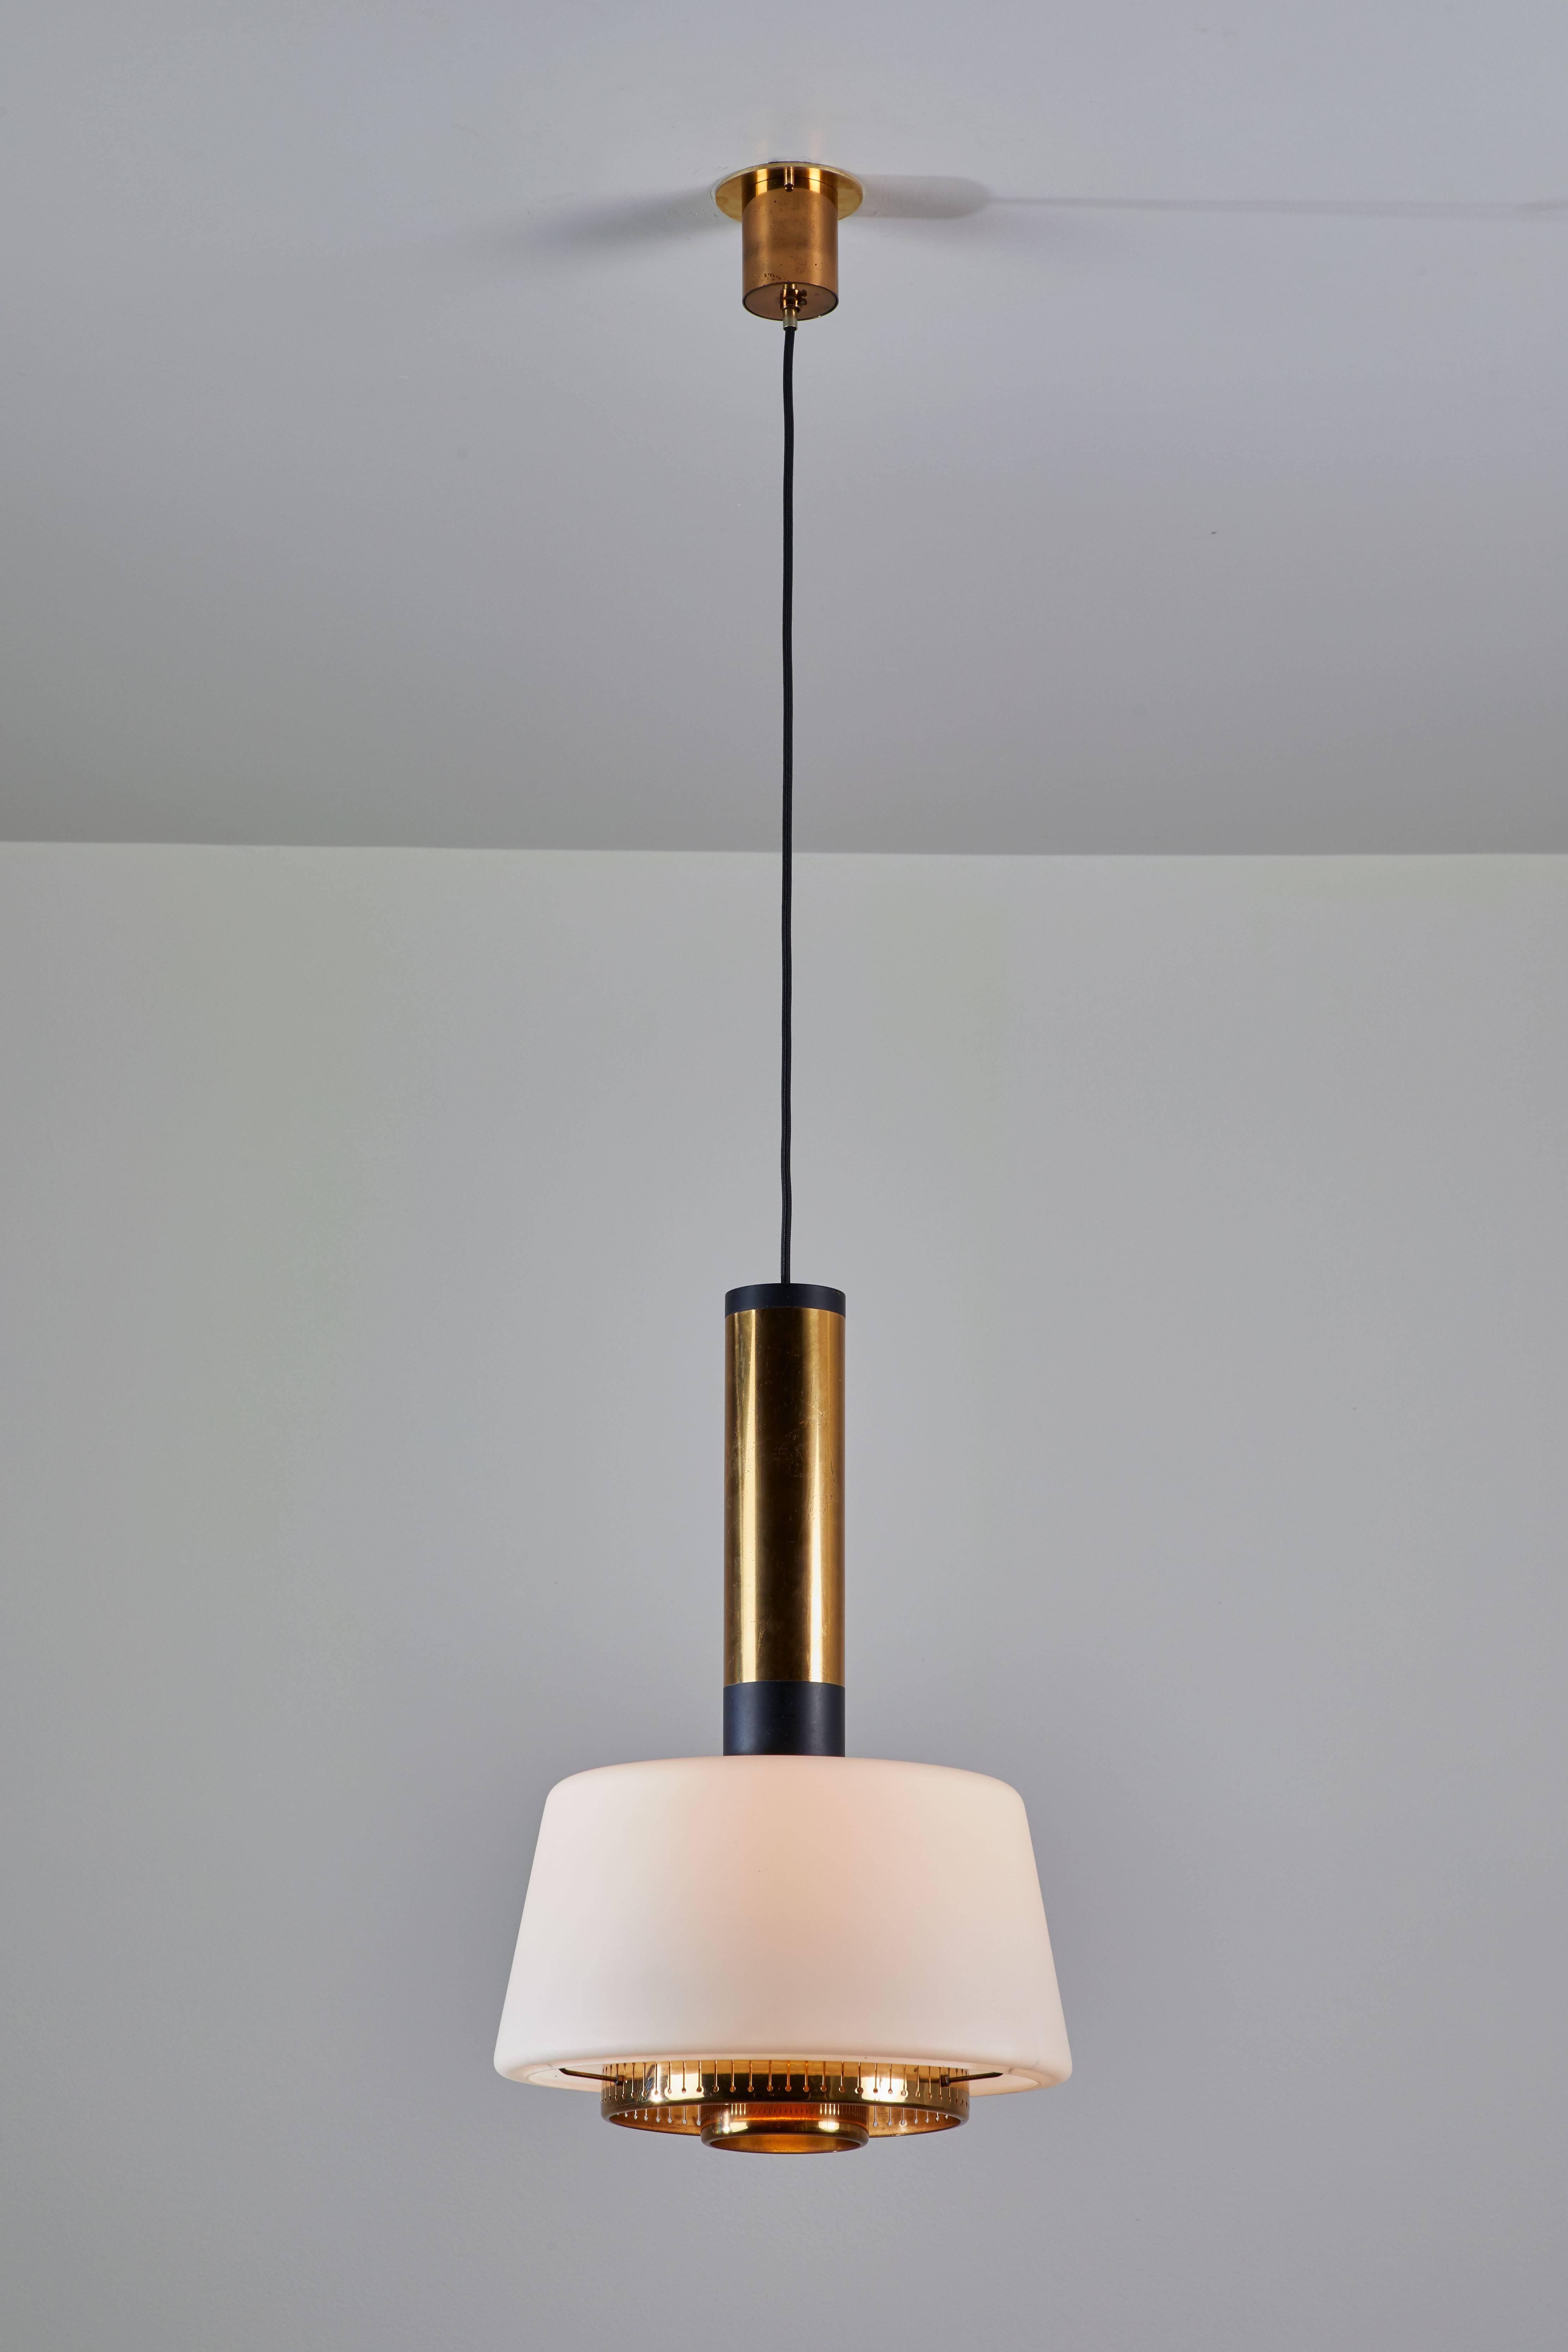 Two pendants manufactured by Stilnovo in Italy circa 1960s. Brushed satin glass diffusers, brass stem and hardware, original canopy with custom brass backplates. Rewired for US junction boxes. Overall drop can be adjusted. Height displayed is for